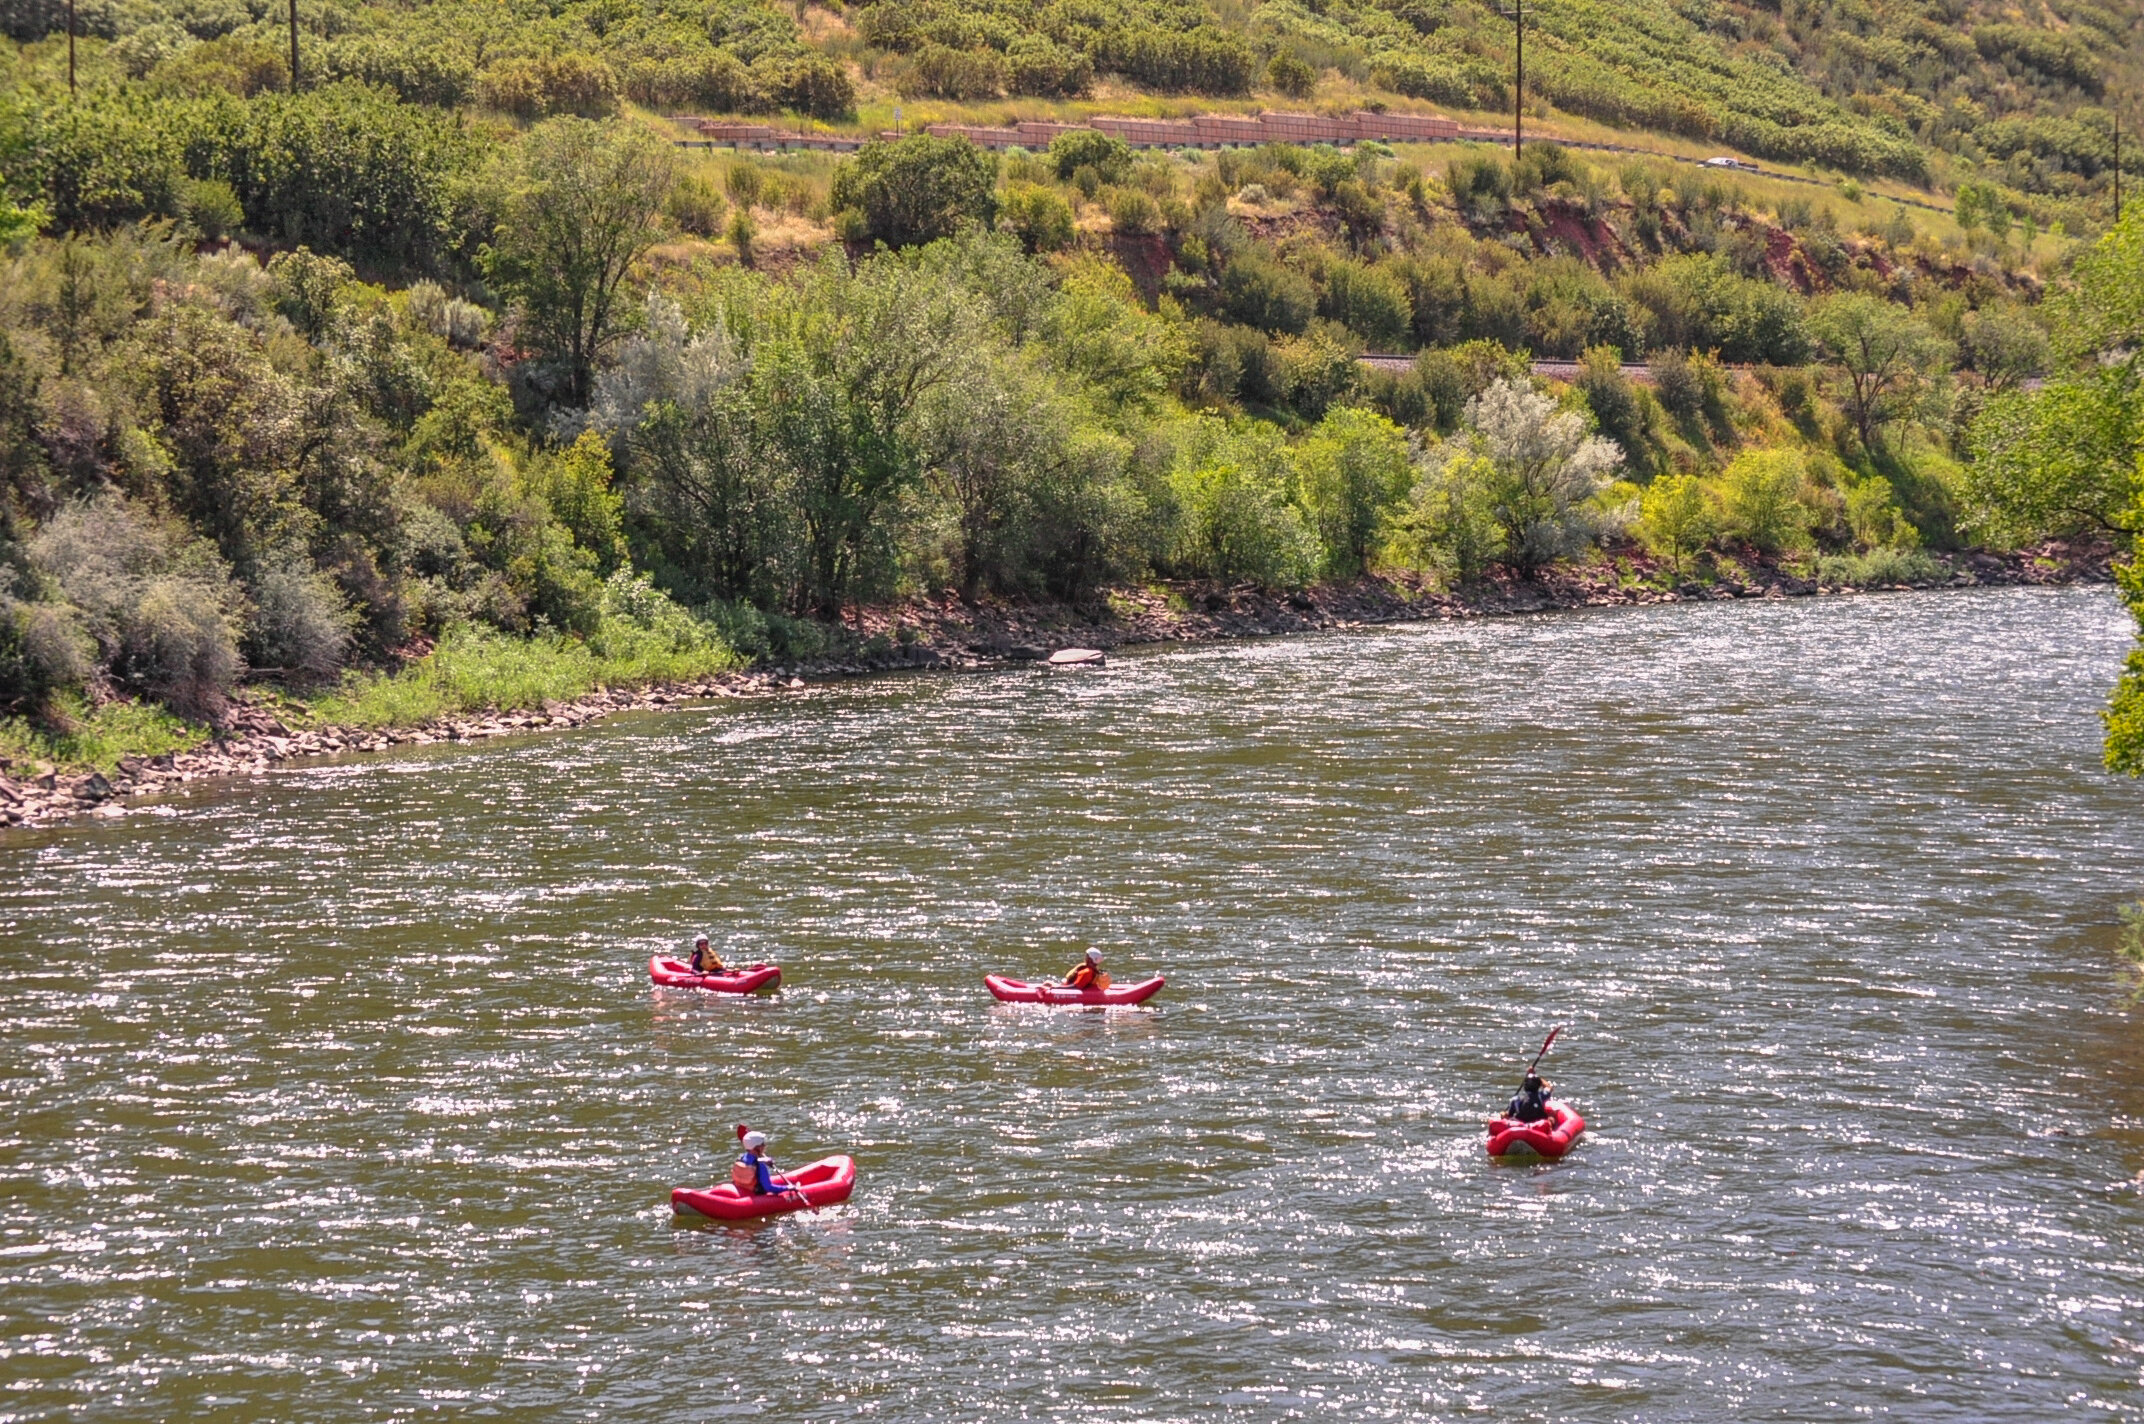 Duckies on the Colorado River, Photo courtesy of Defiance River Outfitters